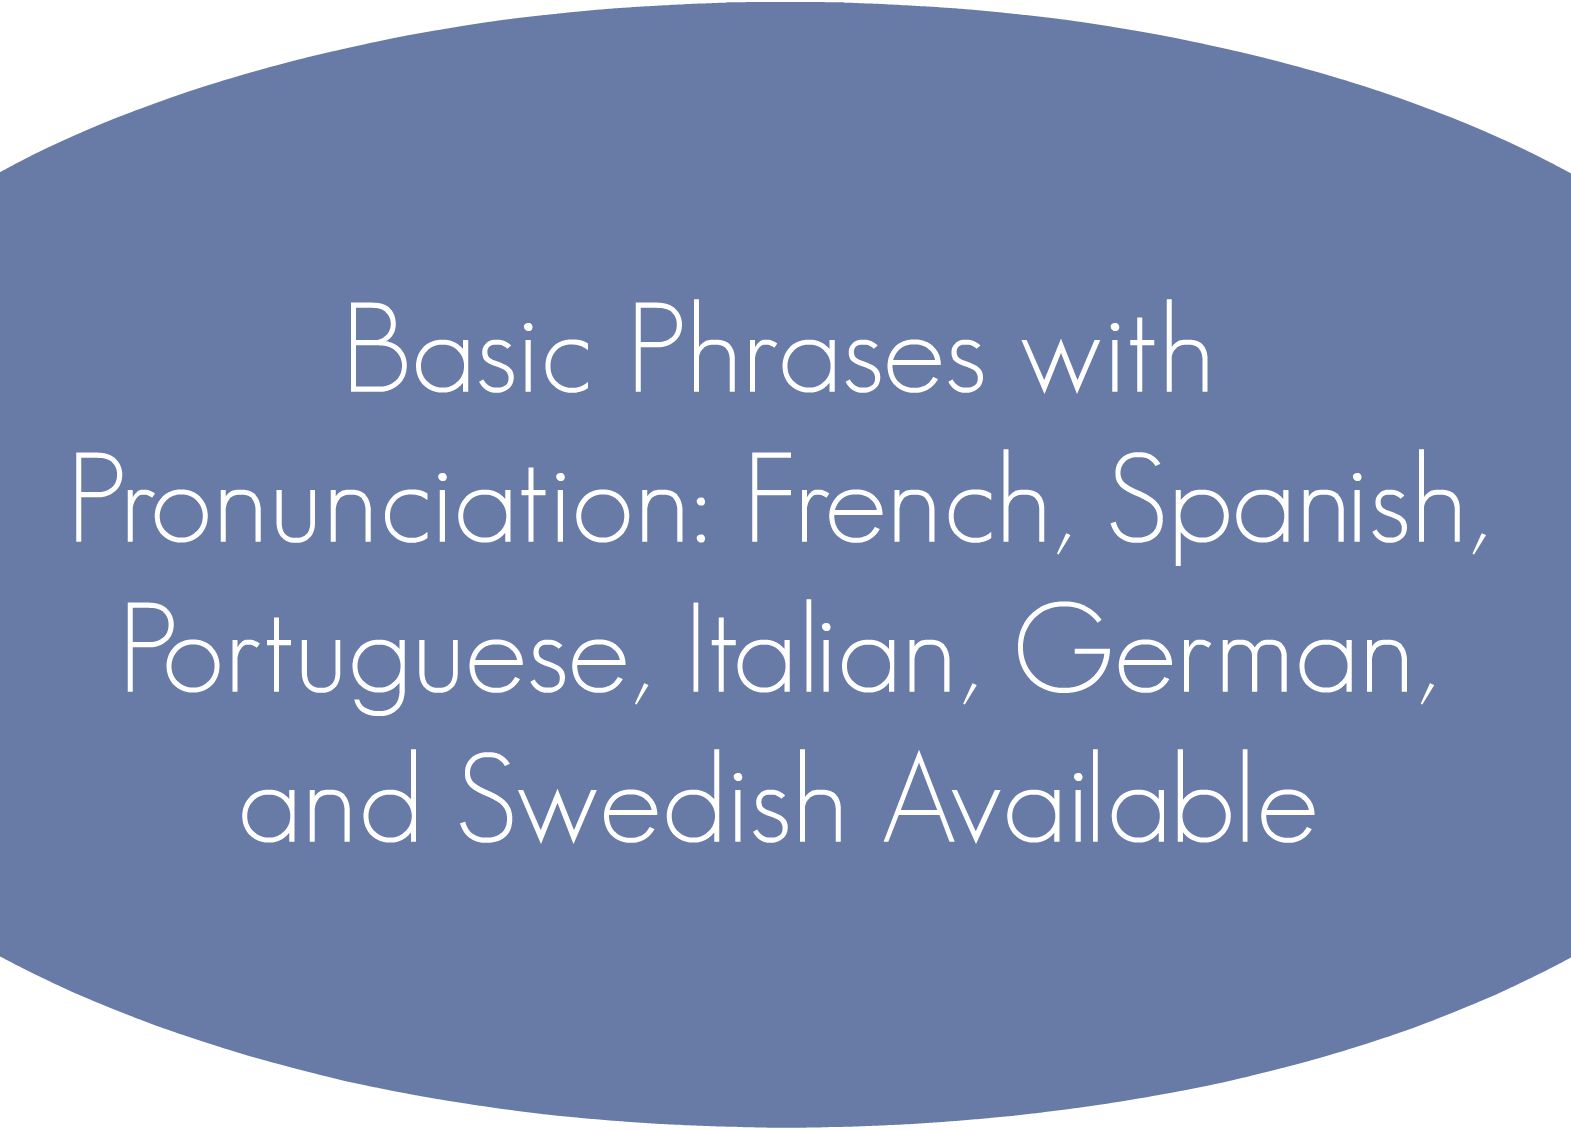 Basic Phrases with Pronunciation: French, Spanish, Portuguese, Italian, German, and Swedish Available